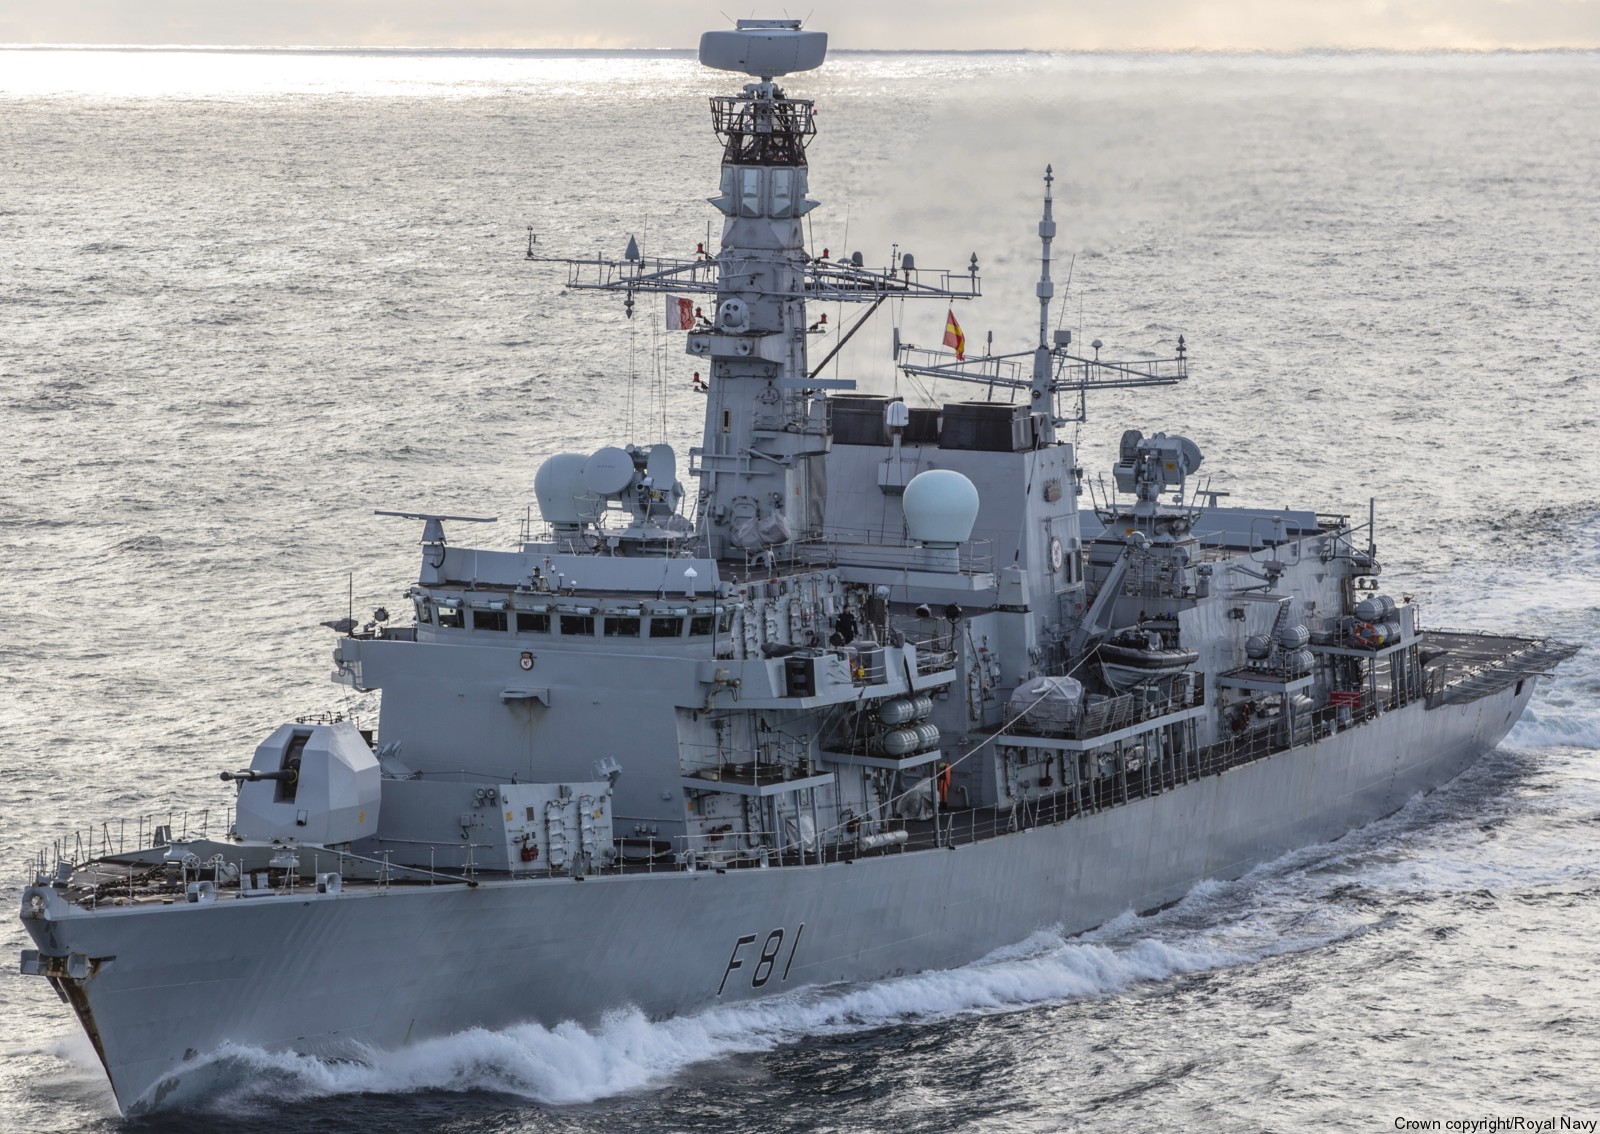 f-81 hms sutherland type 23 duke class guided missile frigate ffg royal navy 16